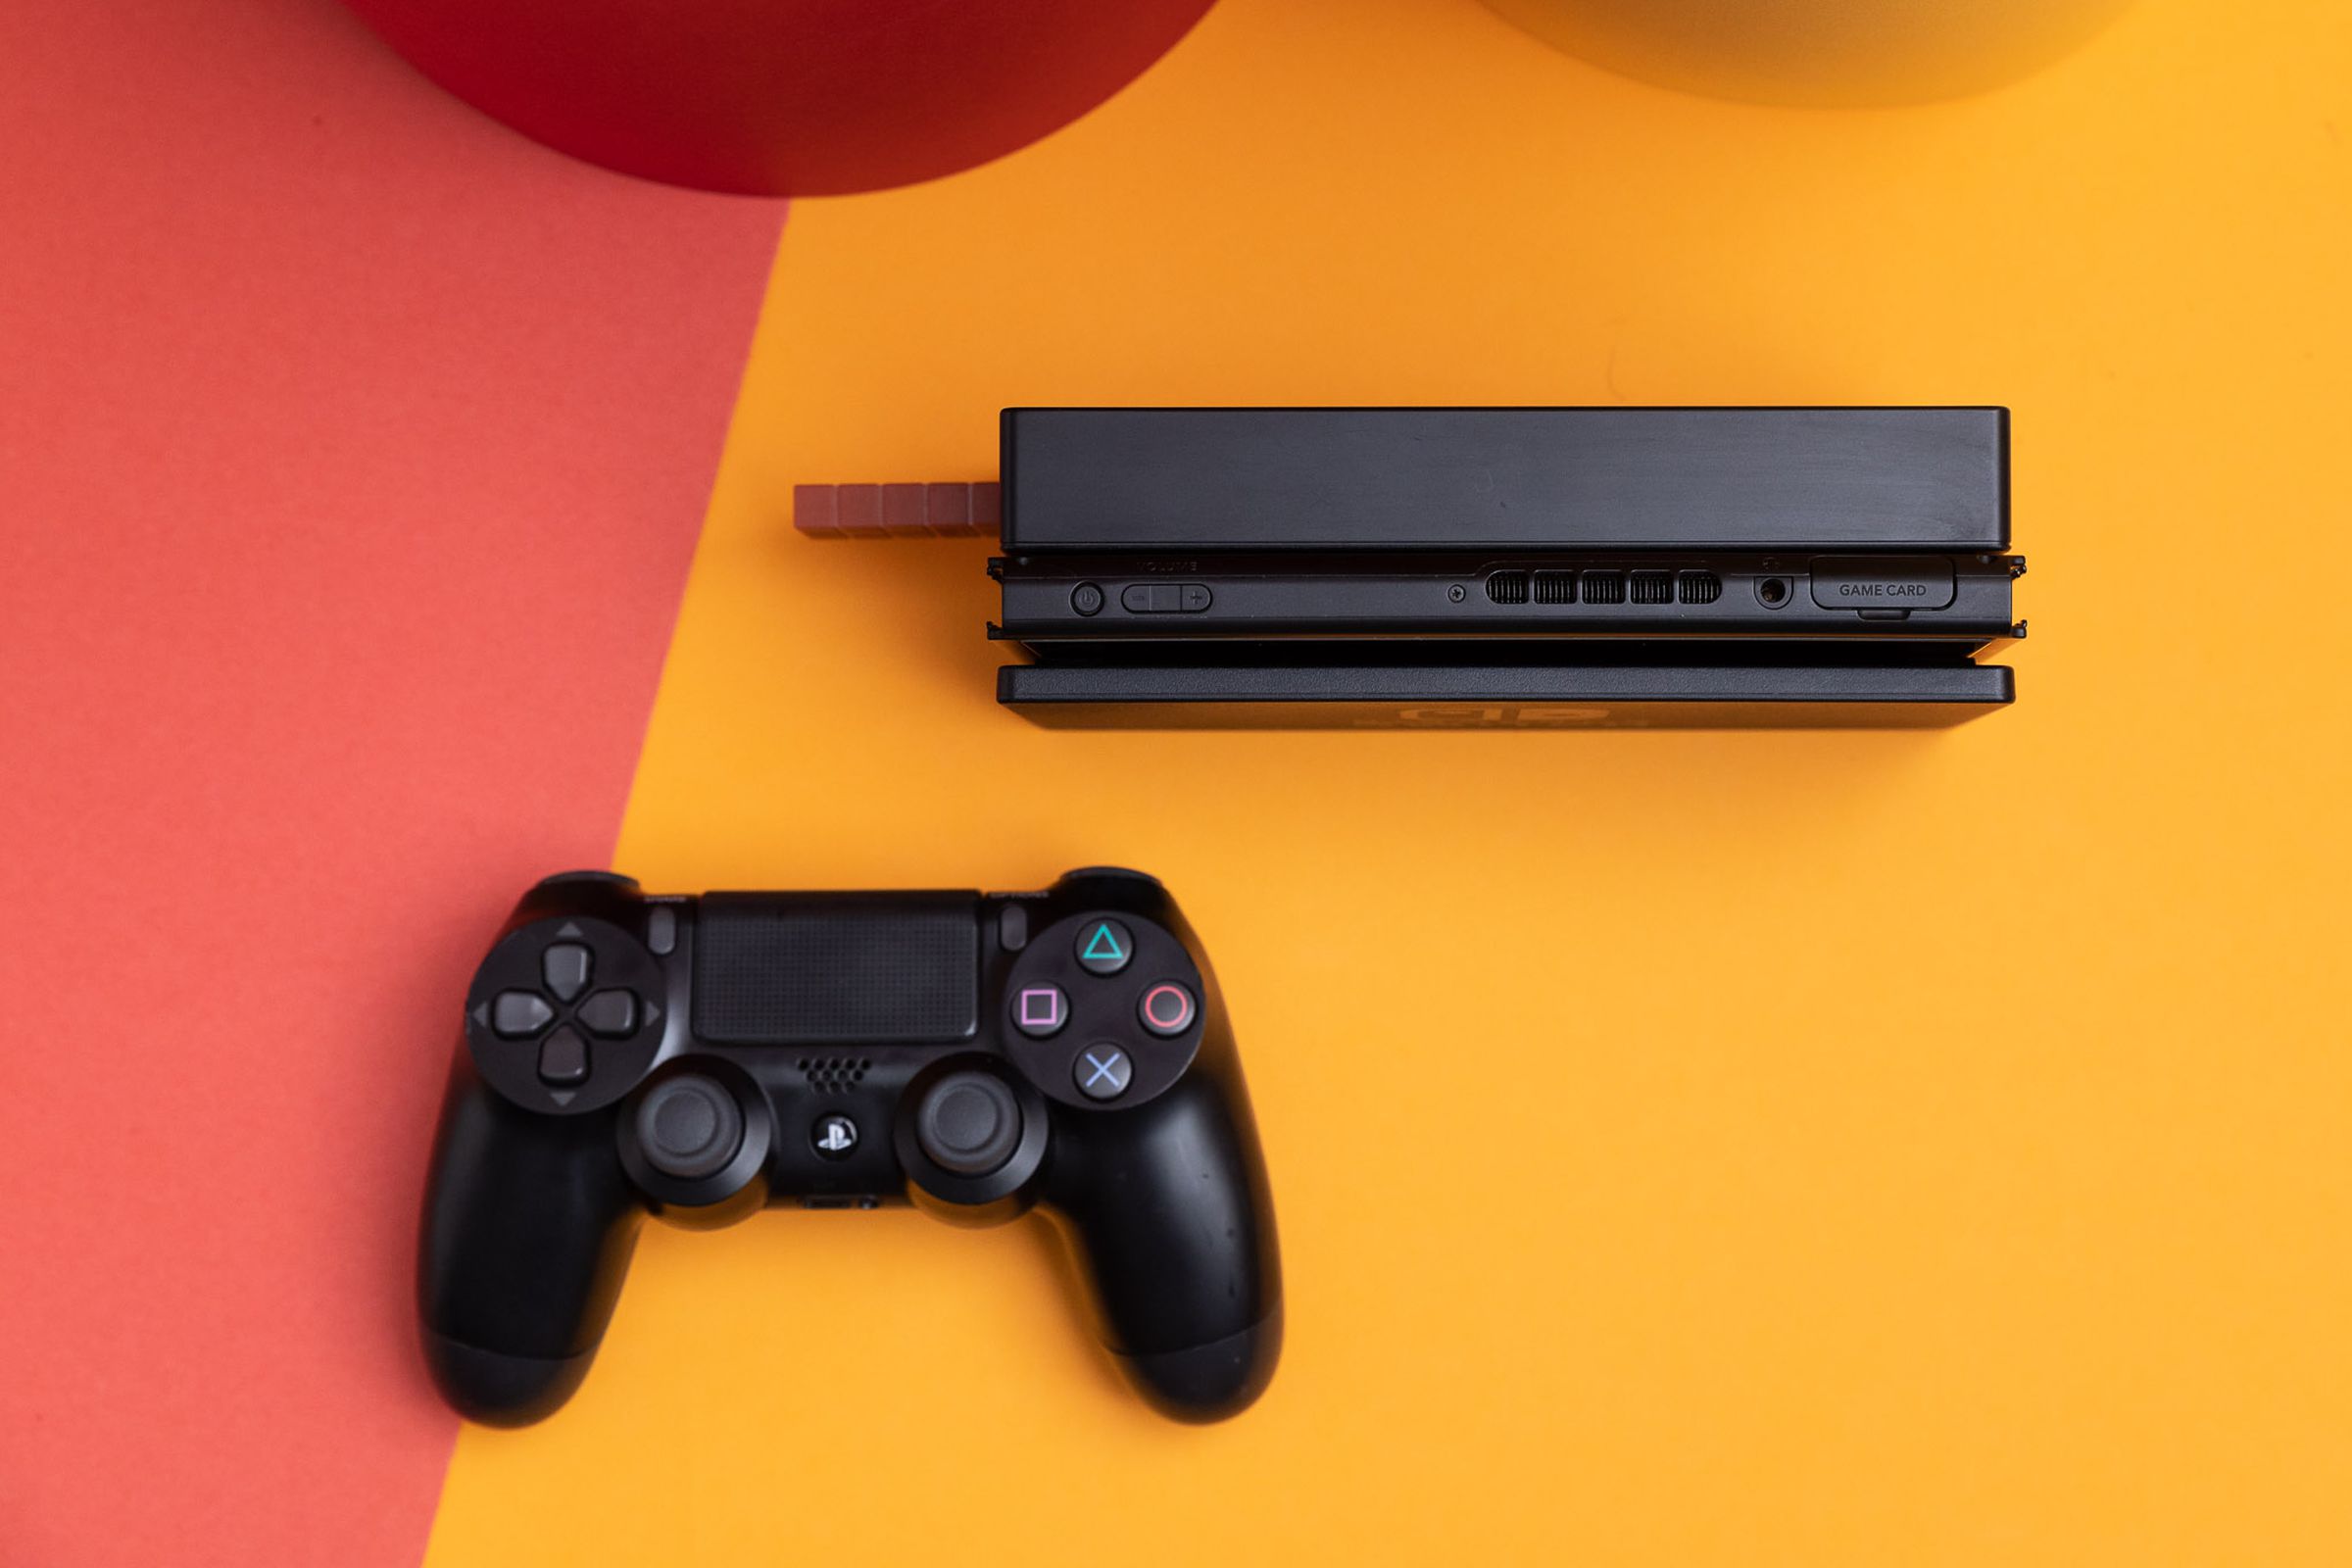 A Nintendo Switch tablet sitting inside of its dock. Next to it is Sony’s DualShock 4 controller, which can be used with the Switch by way of the 8BitDo USB Adapter.